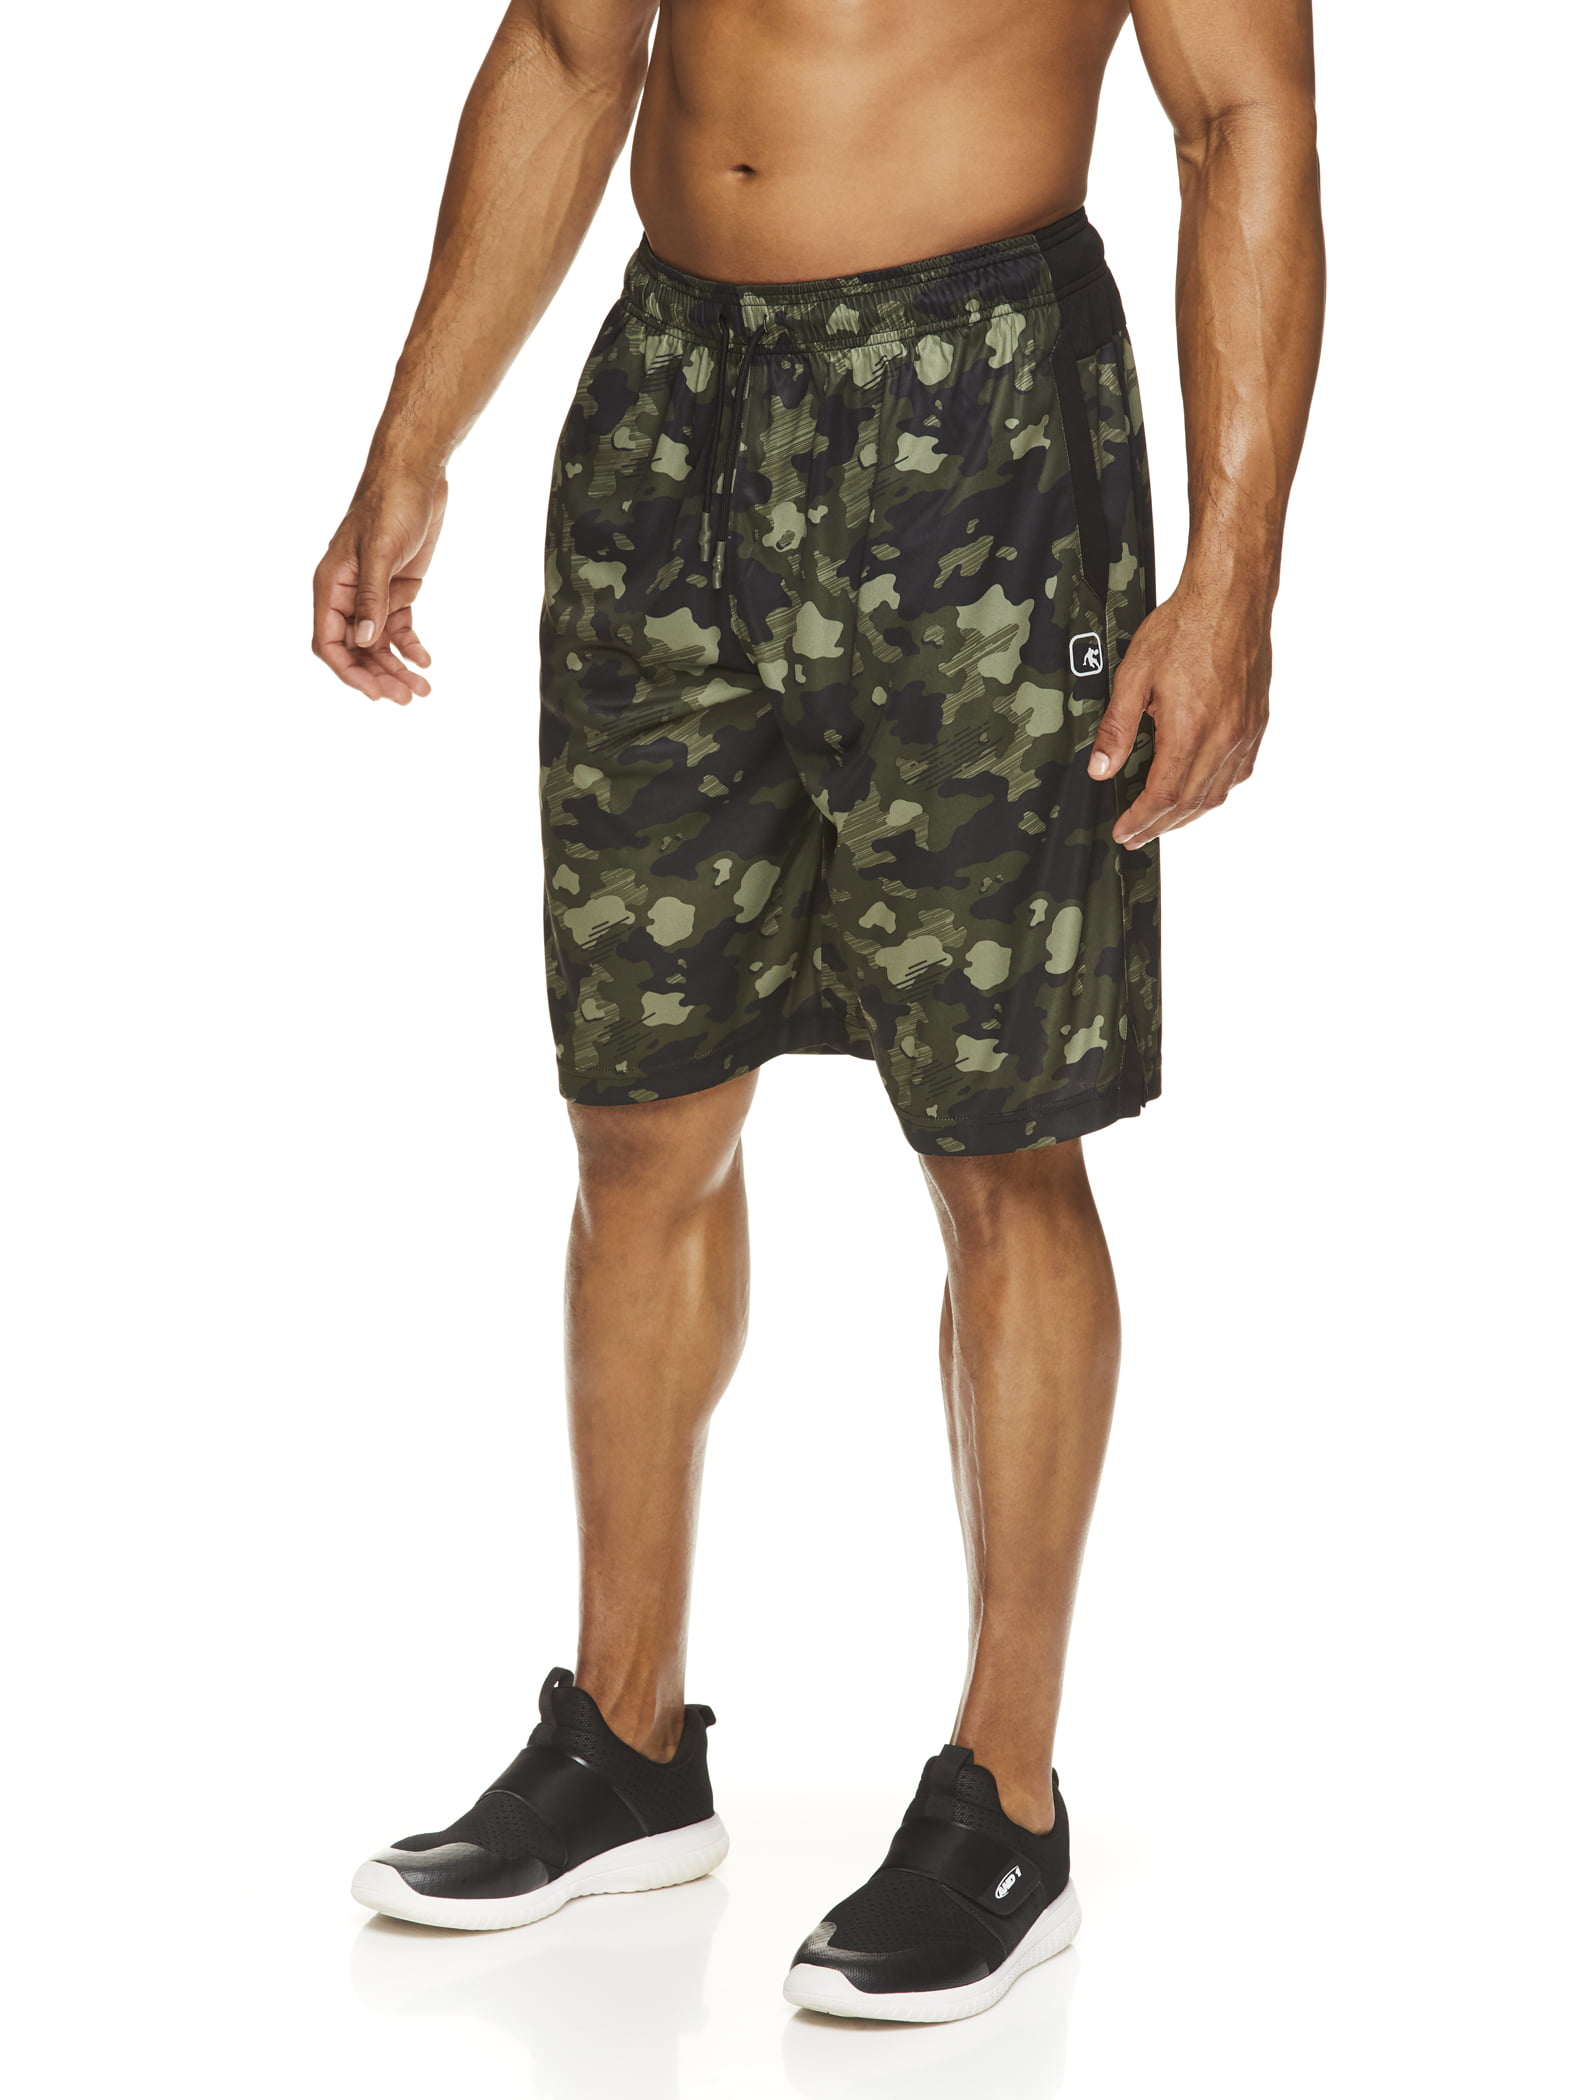 AND1 Men's Active Camo Print Basketball Shorts, up to 5XL